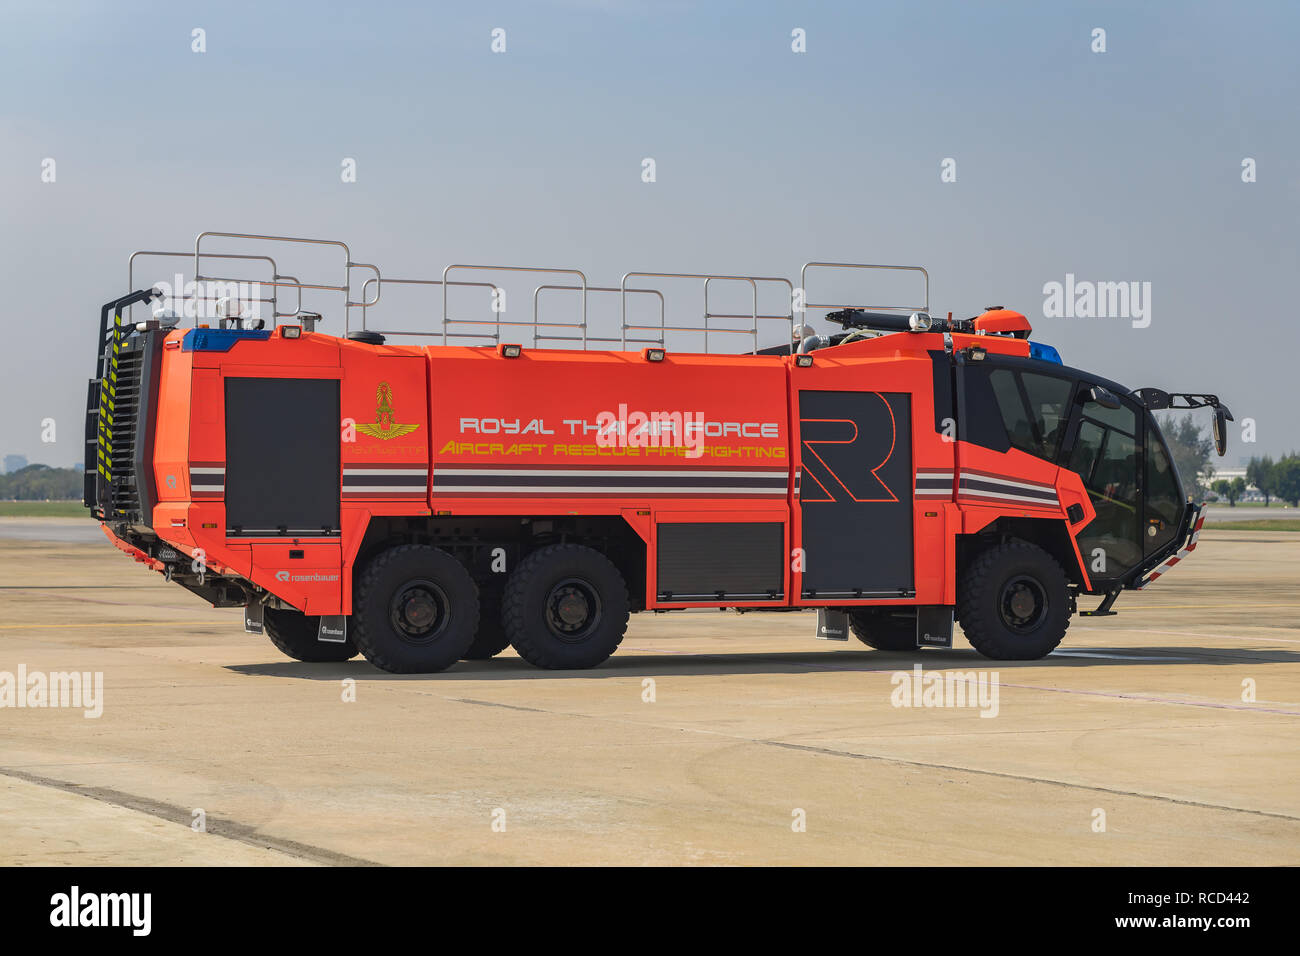 A fire engine belonging to The Royal Airforce. Stock Photo